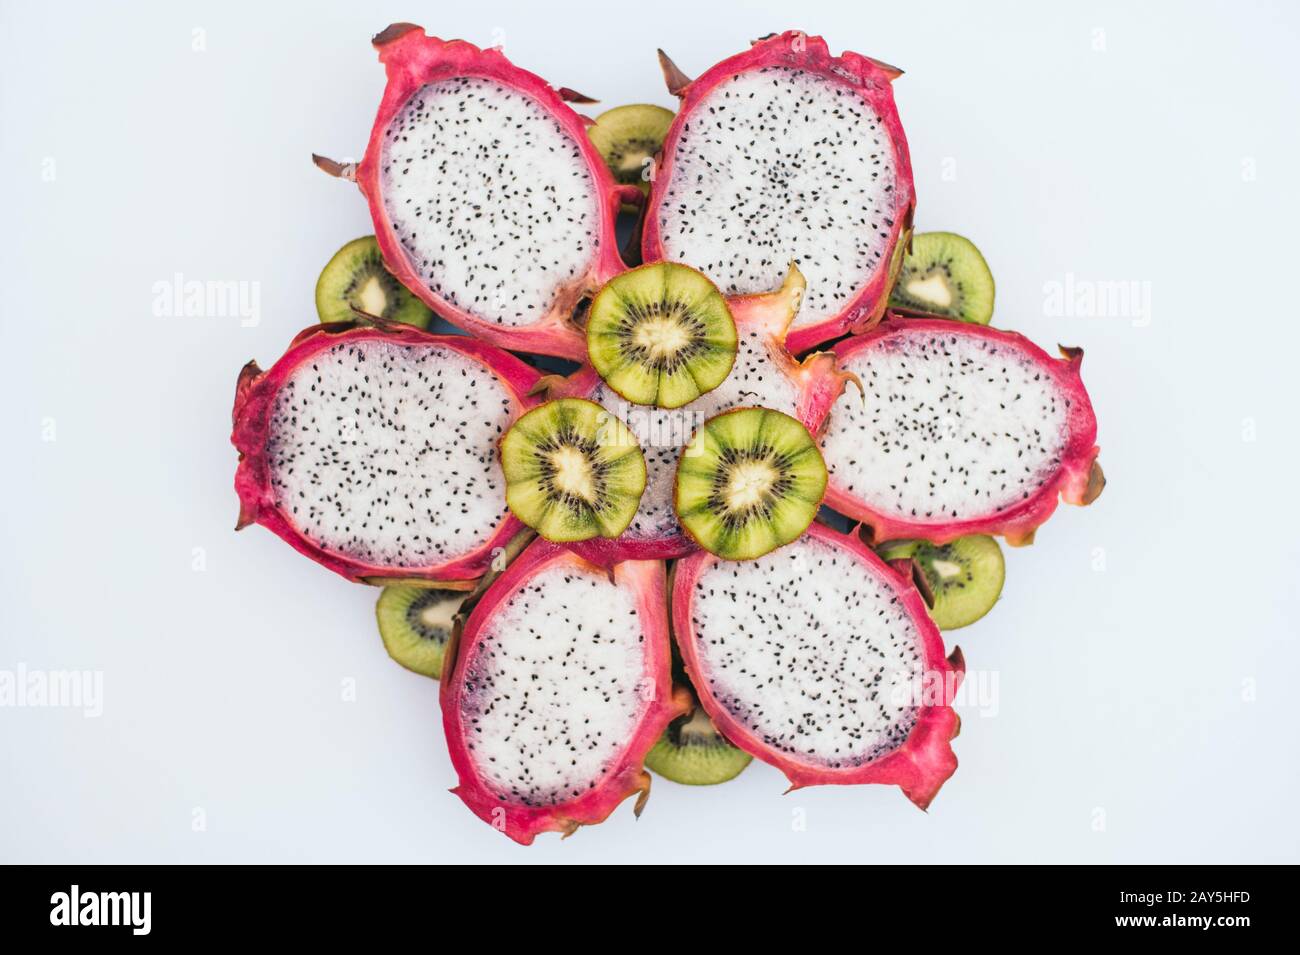 Food art concept. Sliced green kiwi and dragon fruit formed in form of flower. Fresh healthy exotic fruit on white background. Healthy eating and vita Stock Photo